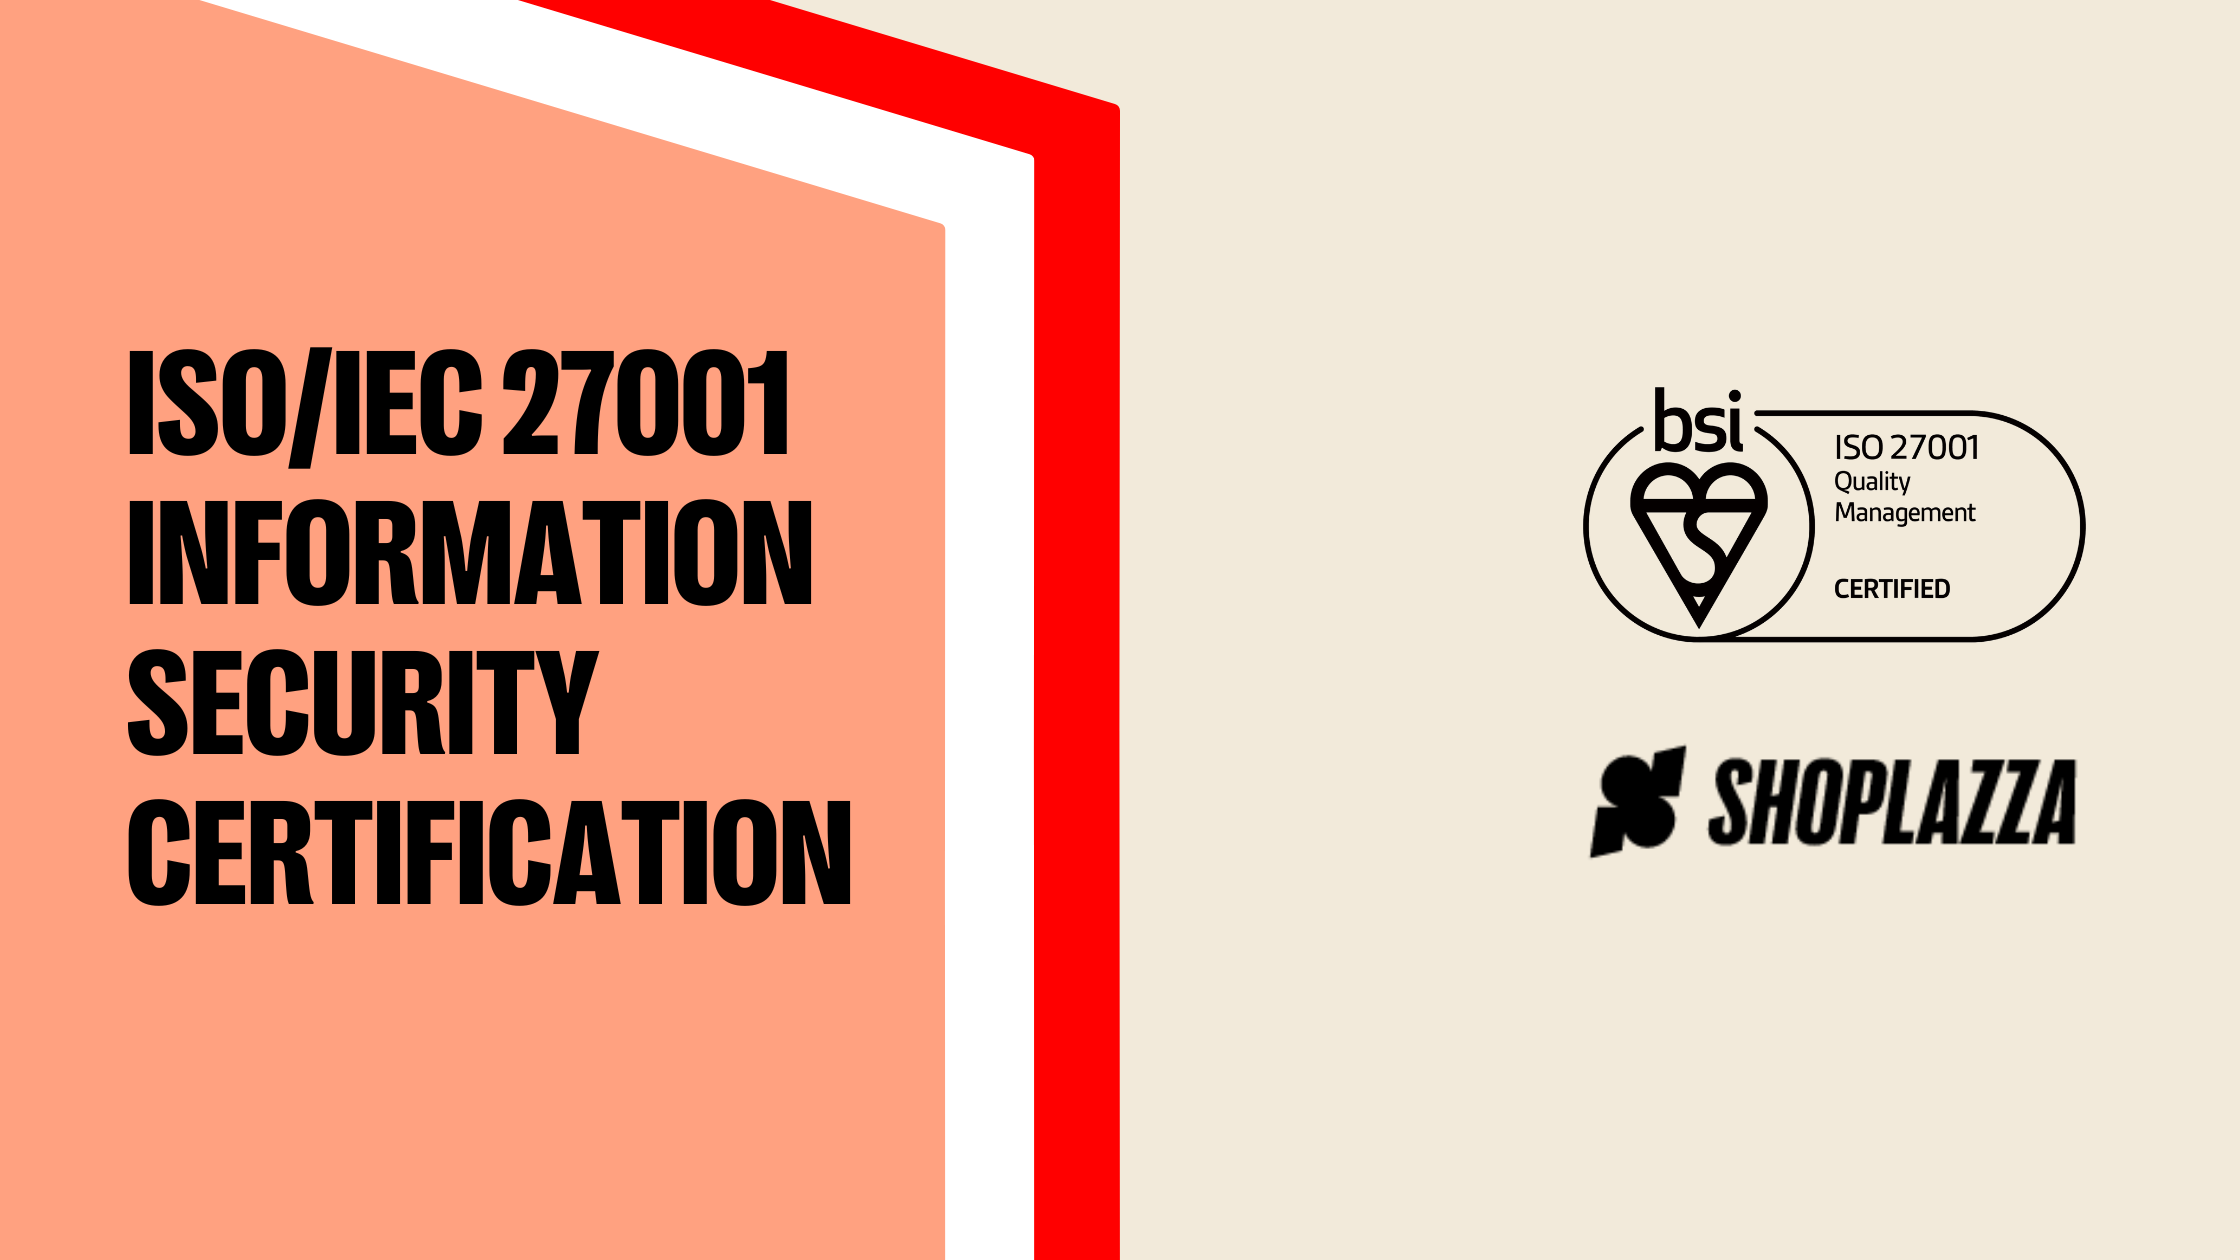 Shoplazza now holds the ISO/IEC 27001 Information Security Certification.